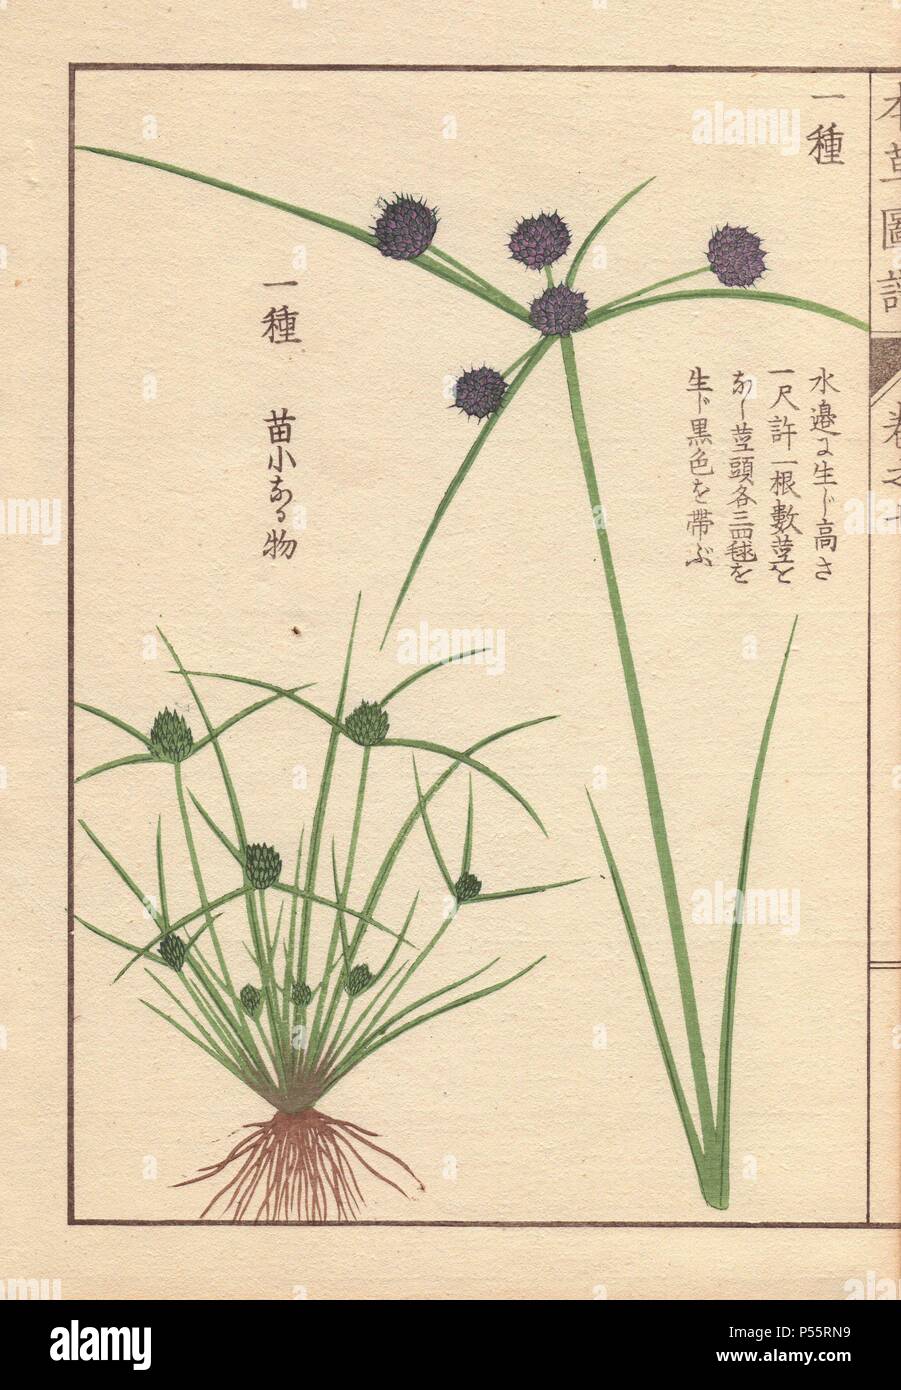 Roots, reeds and flowers of variable flatsedge or smallflower umbrella-sedge, Cyperus difformis L. . Colour-printed woodblock engraving by Kan'en Iwasaki from 'Honzo Zufu,' an Illustrated Guide to Medicinal Plants, 1884. Iwasaki (1786-1842) was a Japanese botanist, entomologist and zoologist. He was one of the first Japanese botanists to incorporate western knowledge into his studies. Stock Photo